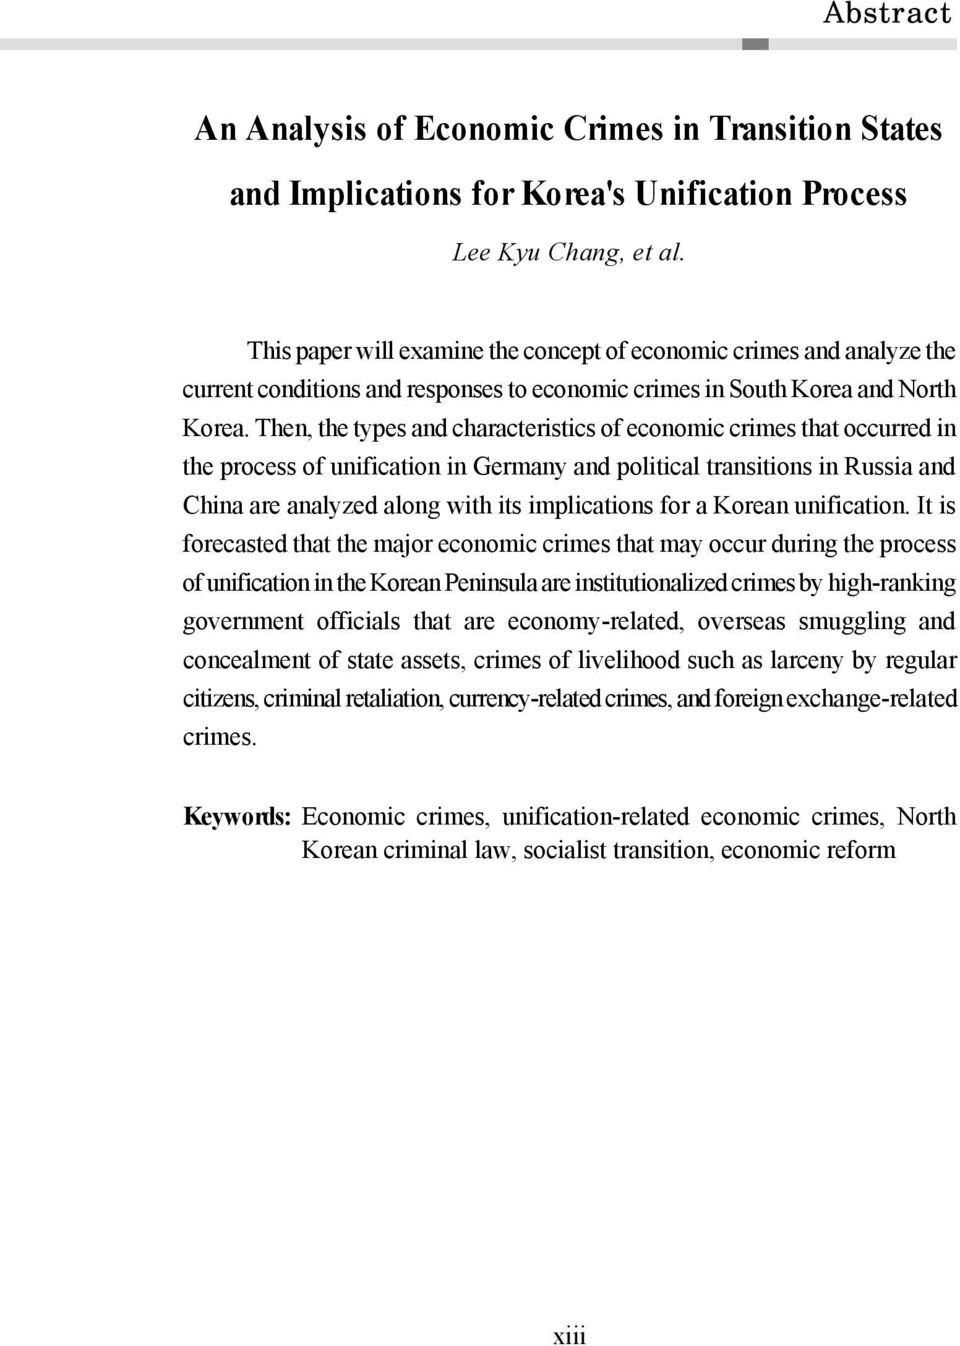 Then, the types and characteristics of economic crimes that occurred in the process of unification in Germany and political transitions in Russia and China are analyzed along with its implications